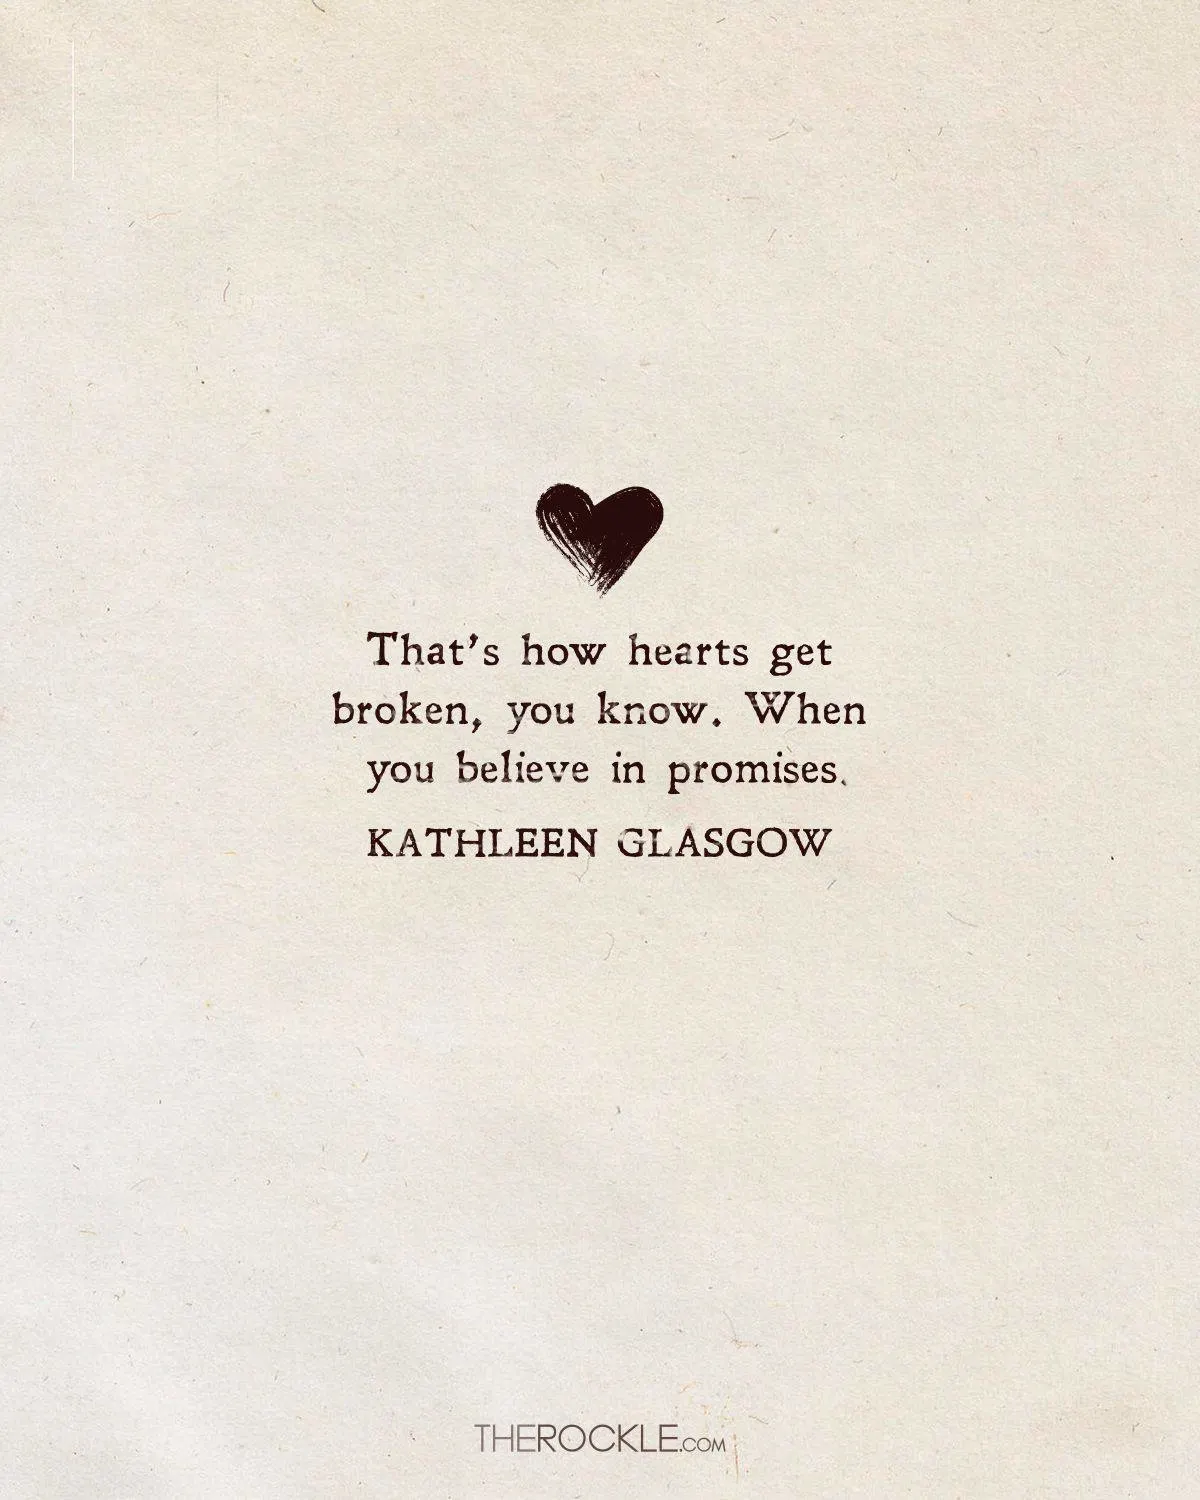 Sad quote about broken heart